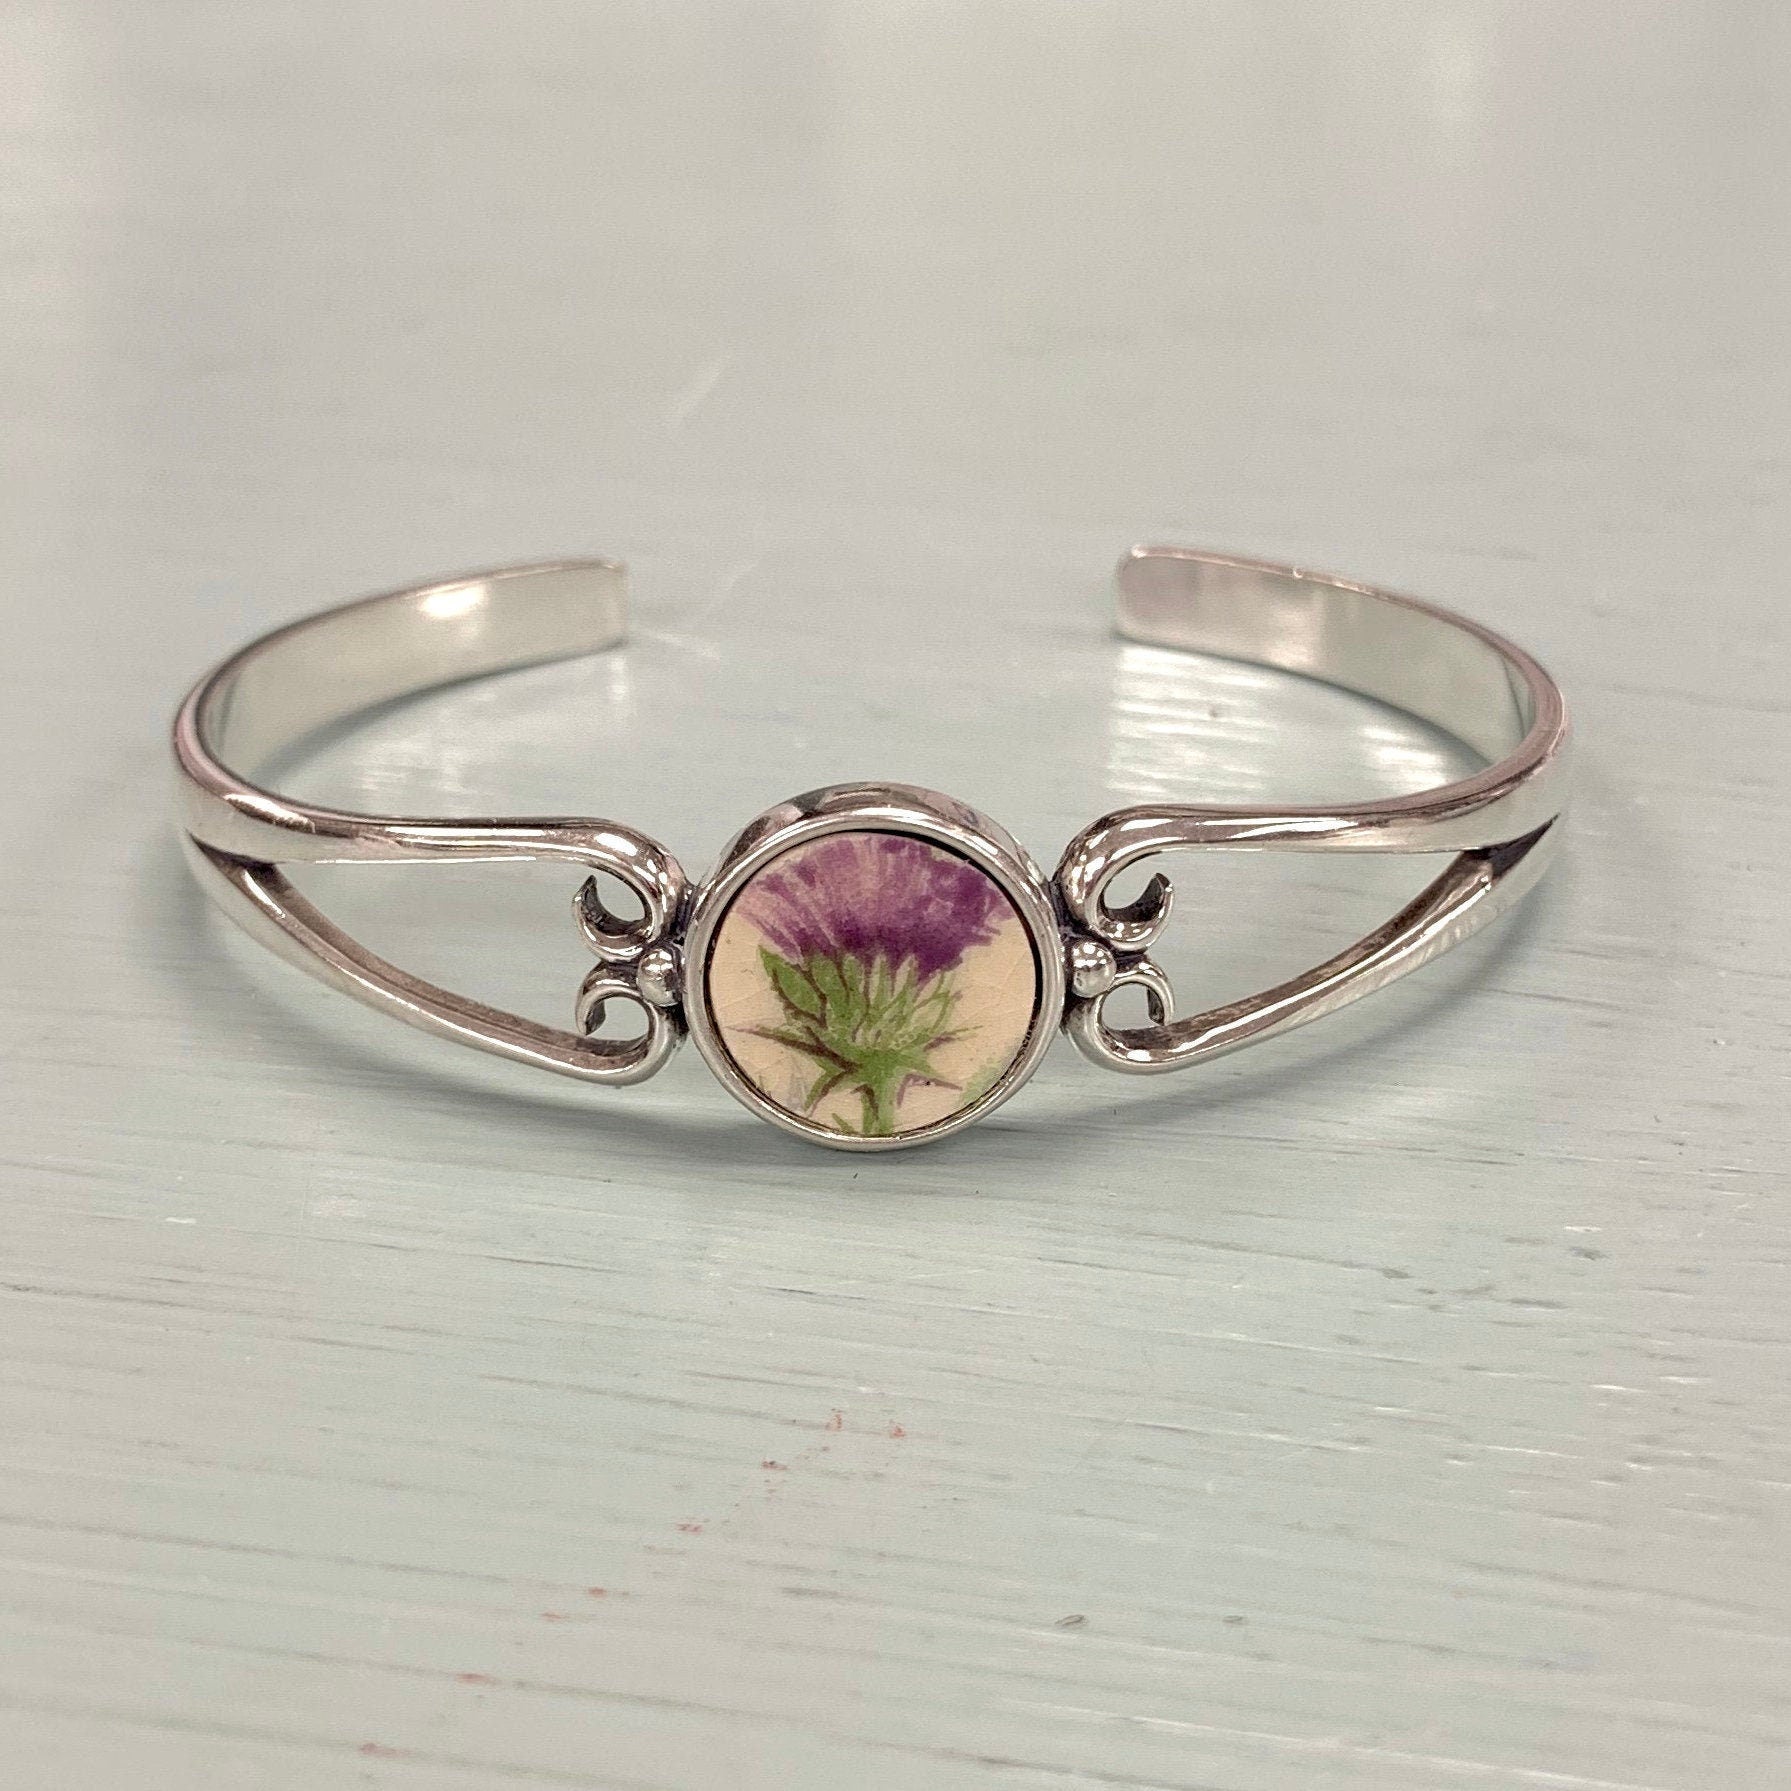 Scottish Thistle Cuff Bracelet, Sterling Silver Jewelry, Bracelets for Women, Broken China Jewelry, Unique Anniversary Gift for Wife